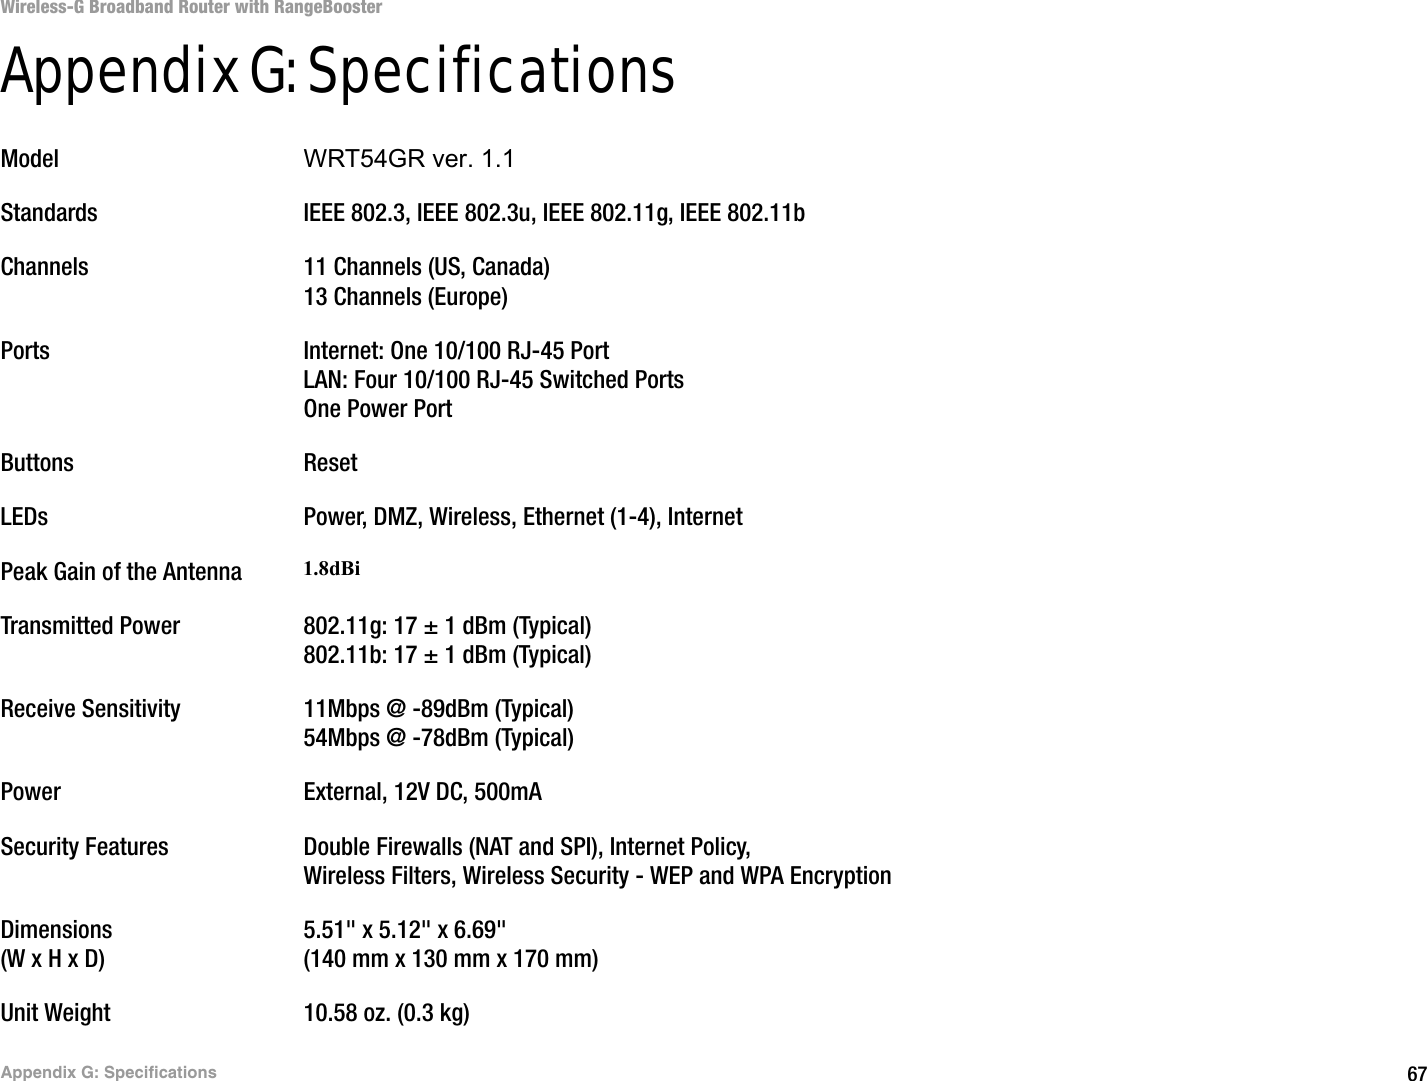 67Appendix G: SpecificationsWireless-G Broadband Router with RangeBoosterAppendix G: SpecificationsModel WRT54GR ver. 1.1Standards IEEE 802.3, IEEE 802.3u, IEEE 802.11g, IEEE 802.11bChannels 11 Channels (US, Canada)13 Channels (Europe)Ports Internet: One 10/100 RJ-45 PortLAN: Four 10/100 RJ-45 Switched PortsOne Power PortButtons ResetLEDs Power, DMZ, Wireless, Ethernet (1-4), InternetPeak Gain of the Antenna 2 dBiTransmitted Power 802.11g: 17 ± 1 dBm (Typical)802.11b: 17 ± 1 dBm (Typical)Receive Sensitivity 11Mbps @ -89dBm (Typical)54Mbps @ -78dBm (Typical)Power External, 12V DC, 500mASecurity Features Double Firewalls (NAT and SPI), Internet Policy, Wireless Filters, Wireless Security - WEP and WPA Encryption Dimensions 5.51&quot; x 5.12&quot; x 6.69&quot;(W x H x D) (140 mm x 130 mm x 170 mm)Unit Weight 10.58 oz. (0.3 kg)1.8dBi